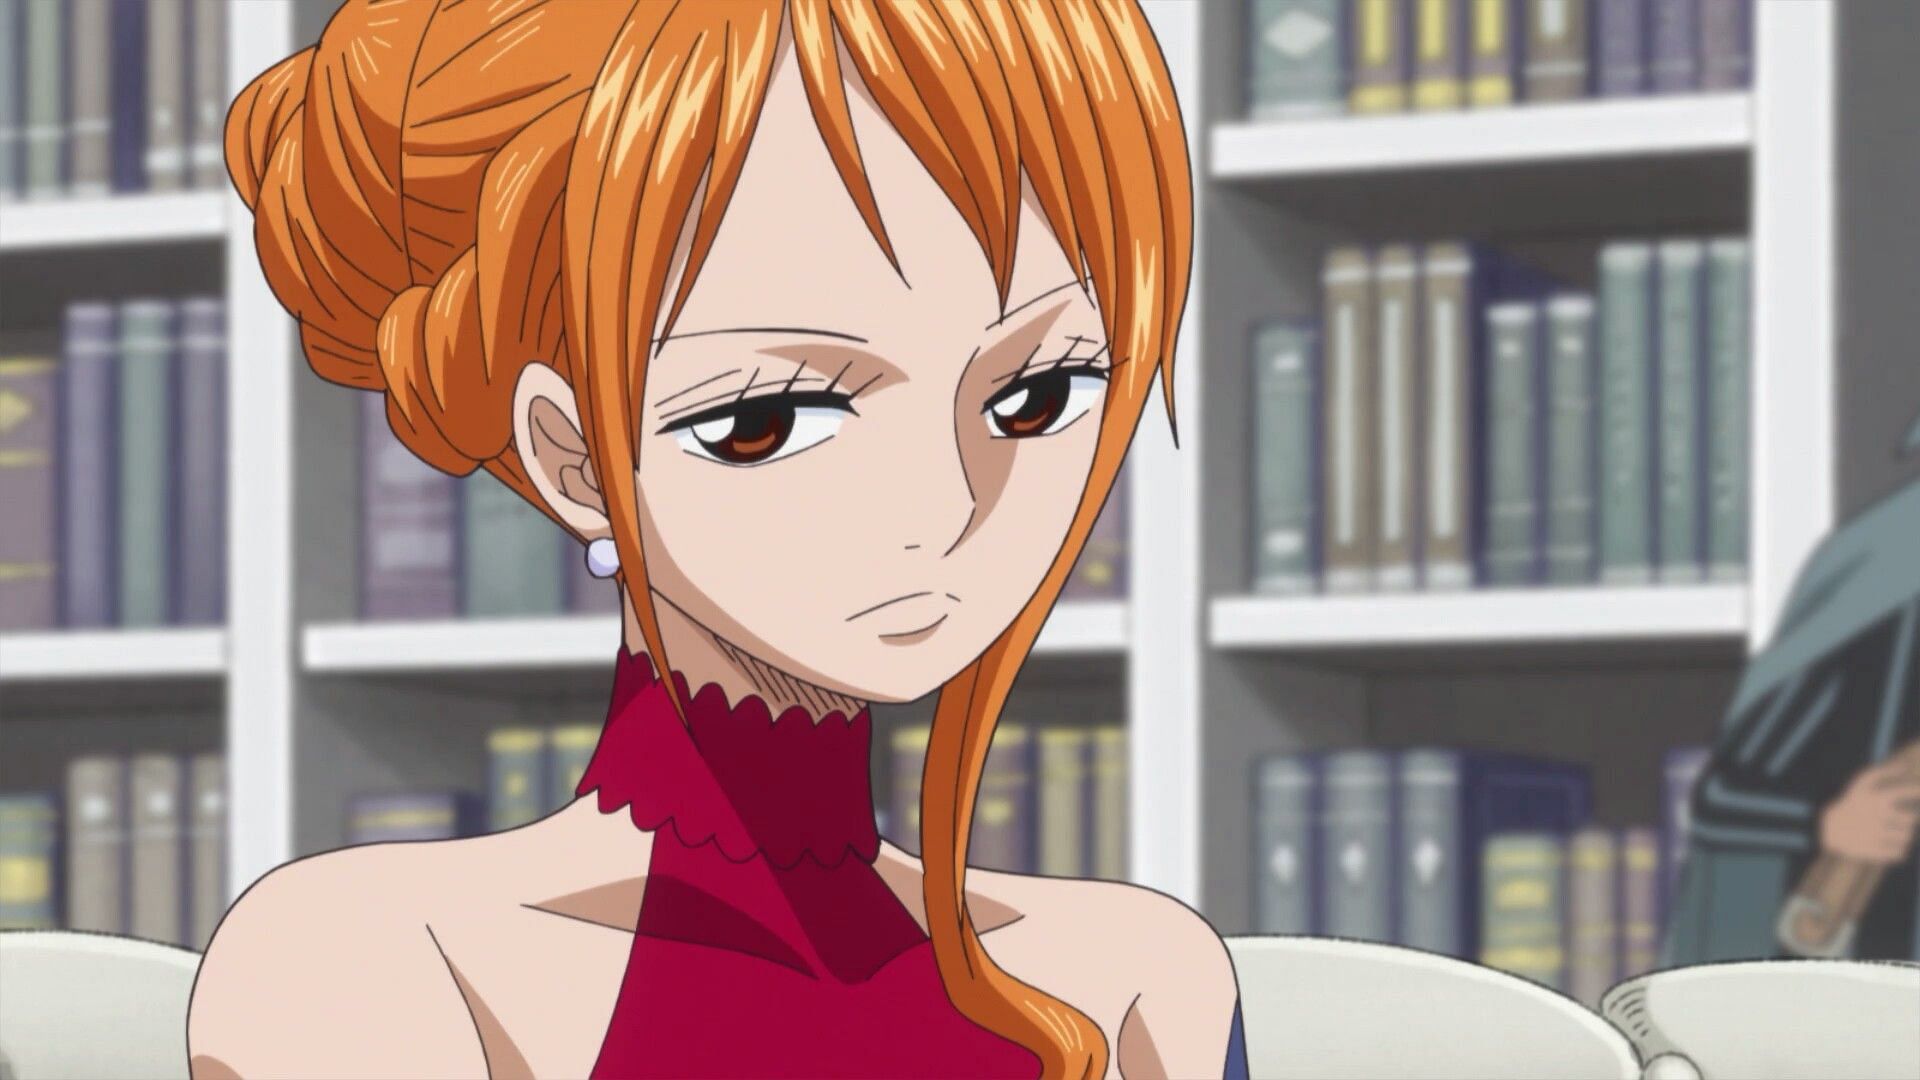 Nami as shown in One Piece anime (Image via Toei Animation)